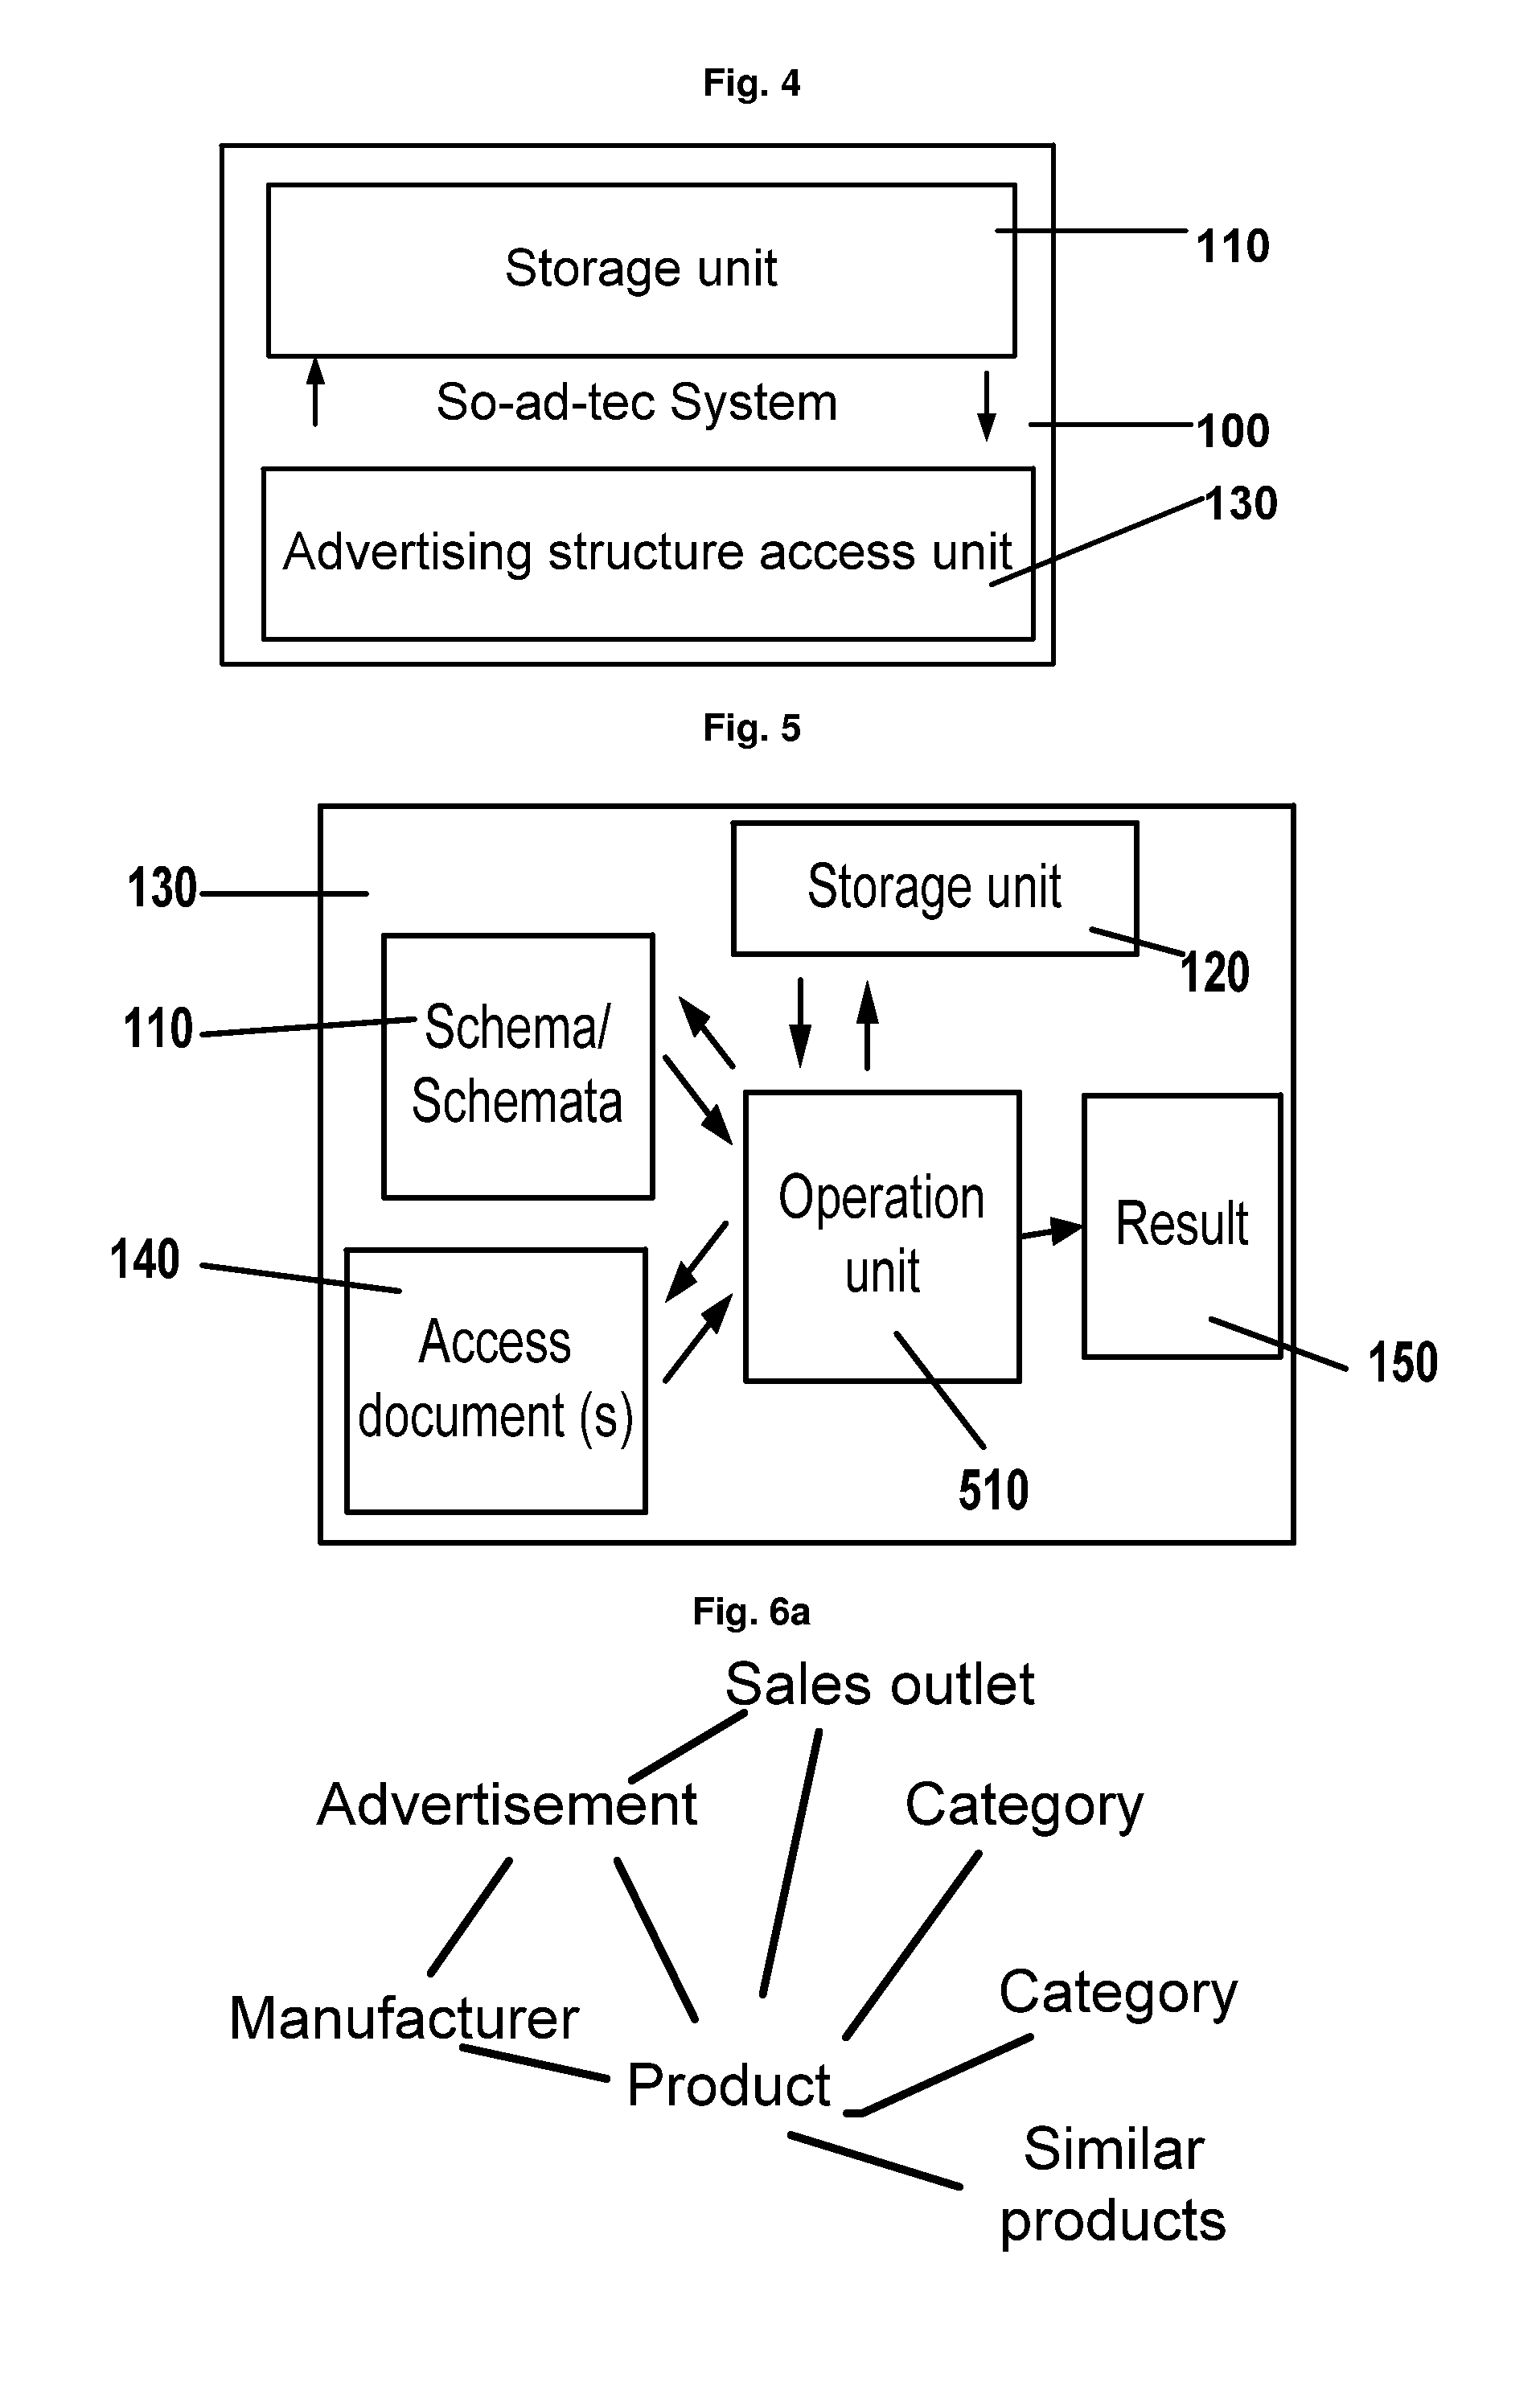 Social advertising technology (so-ad-tec) system and method for advertising for and in documents, and other systems and methods for accessing, structuring, and evaluating documents